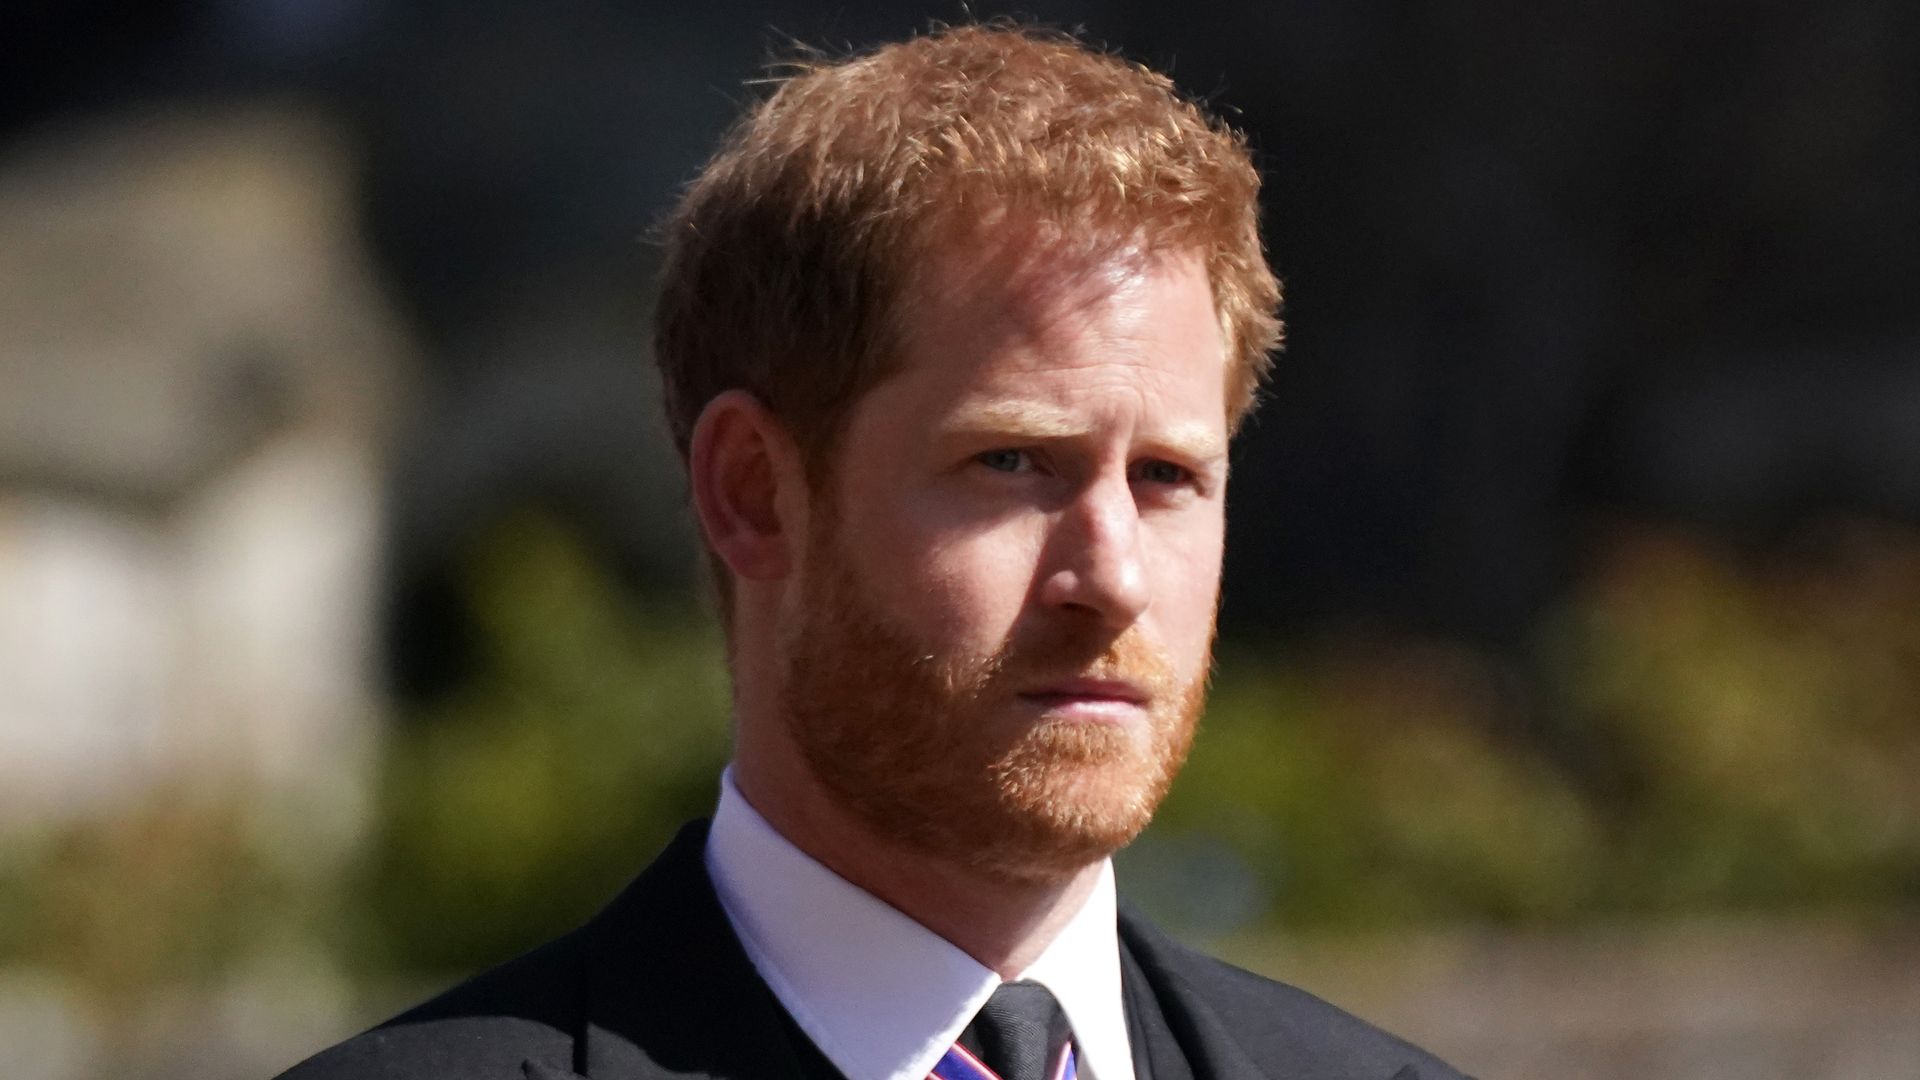 Prince Harry arrives for the funeral of Prince Philip, Duke of Edinburgh at St George's Chapel at Windsor Castle 